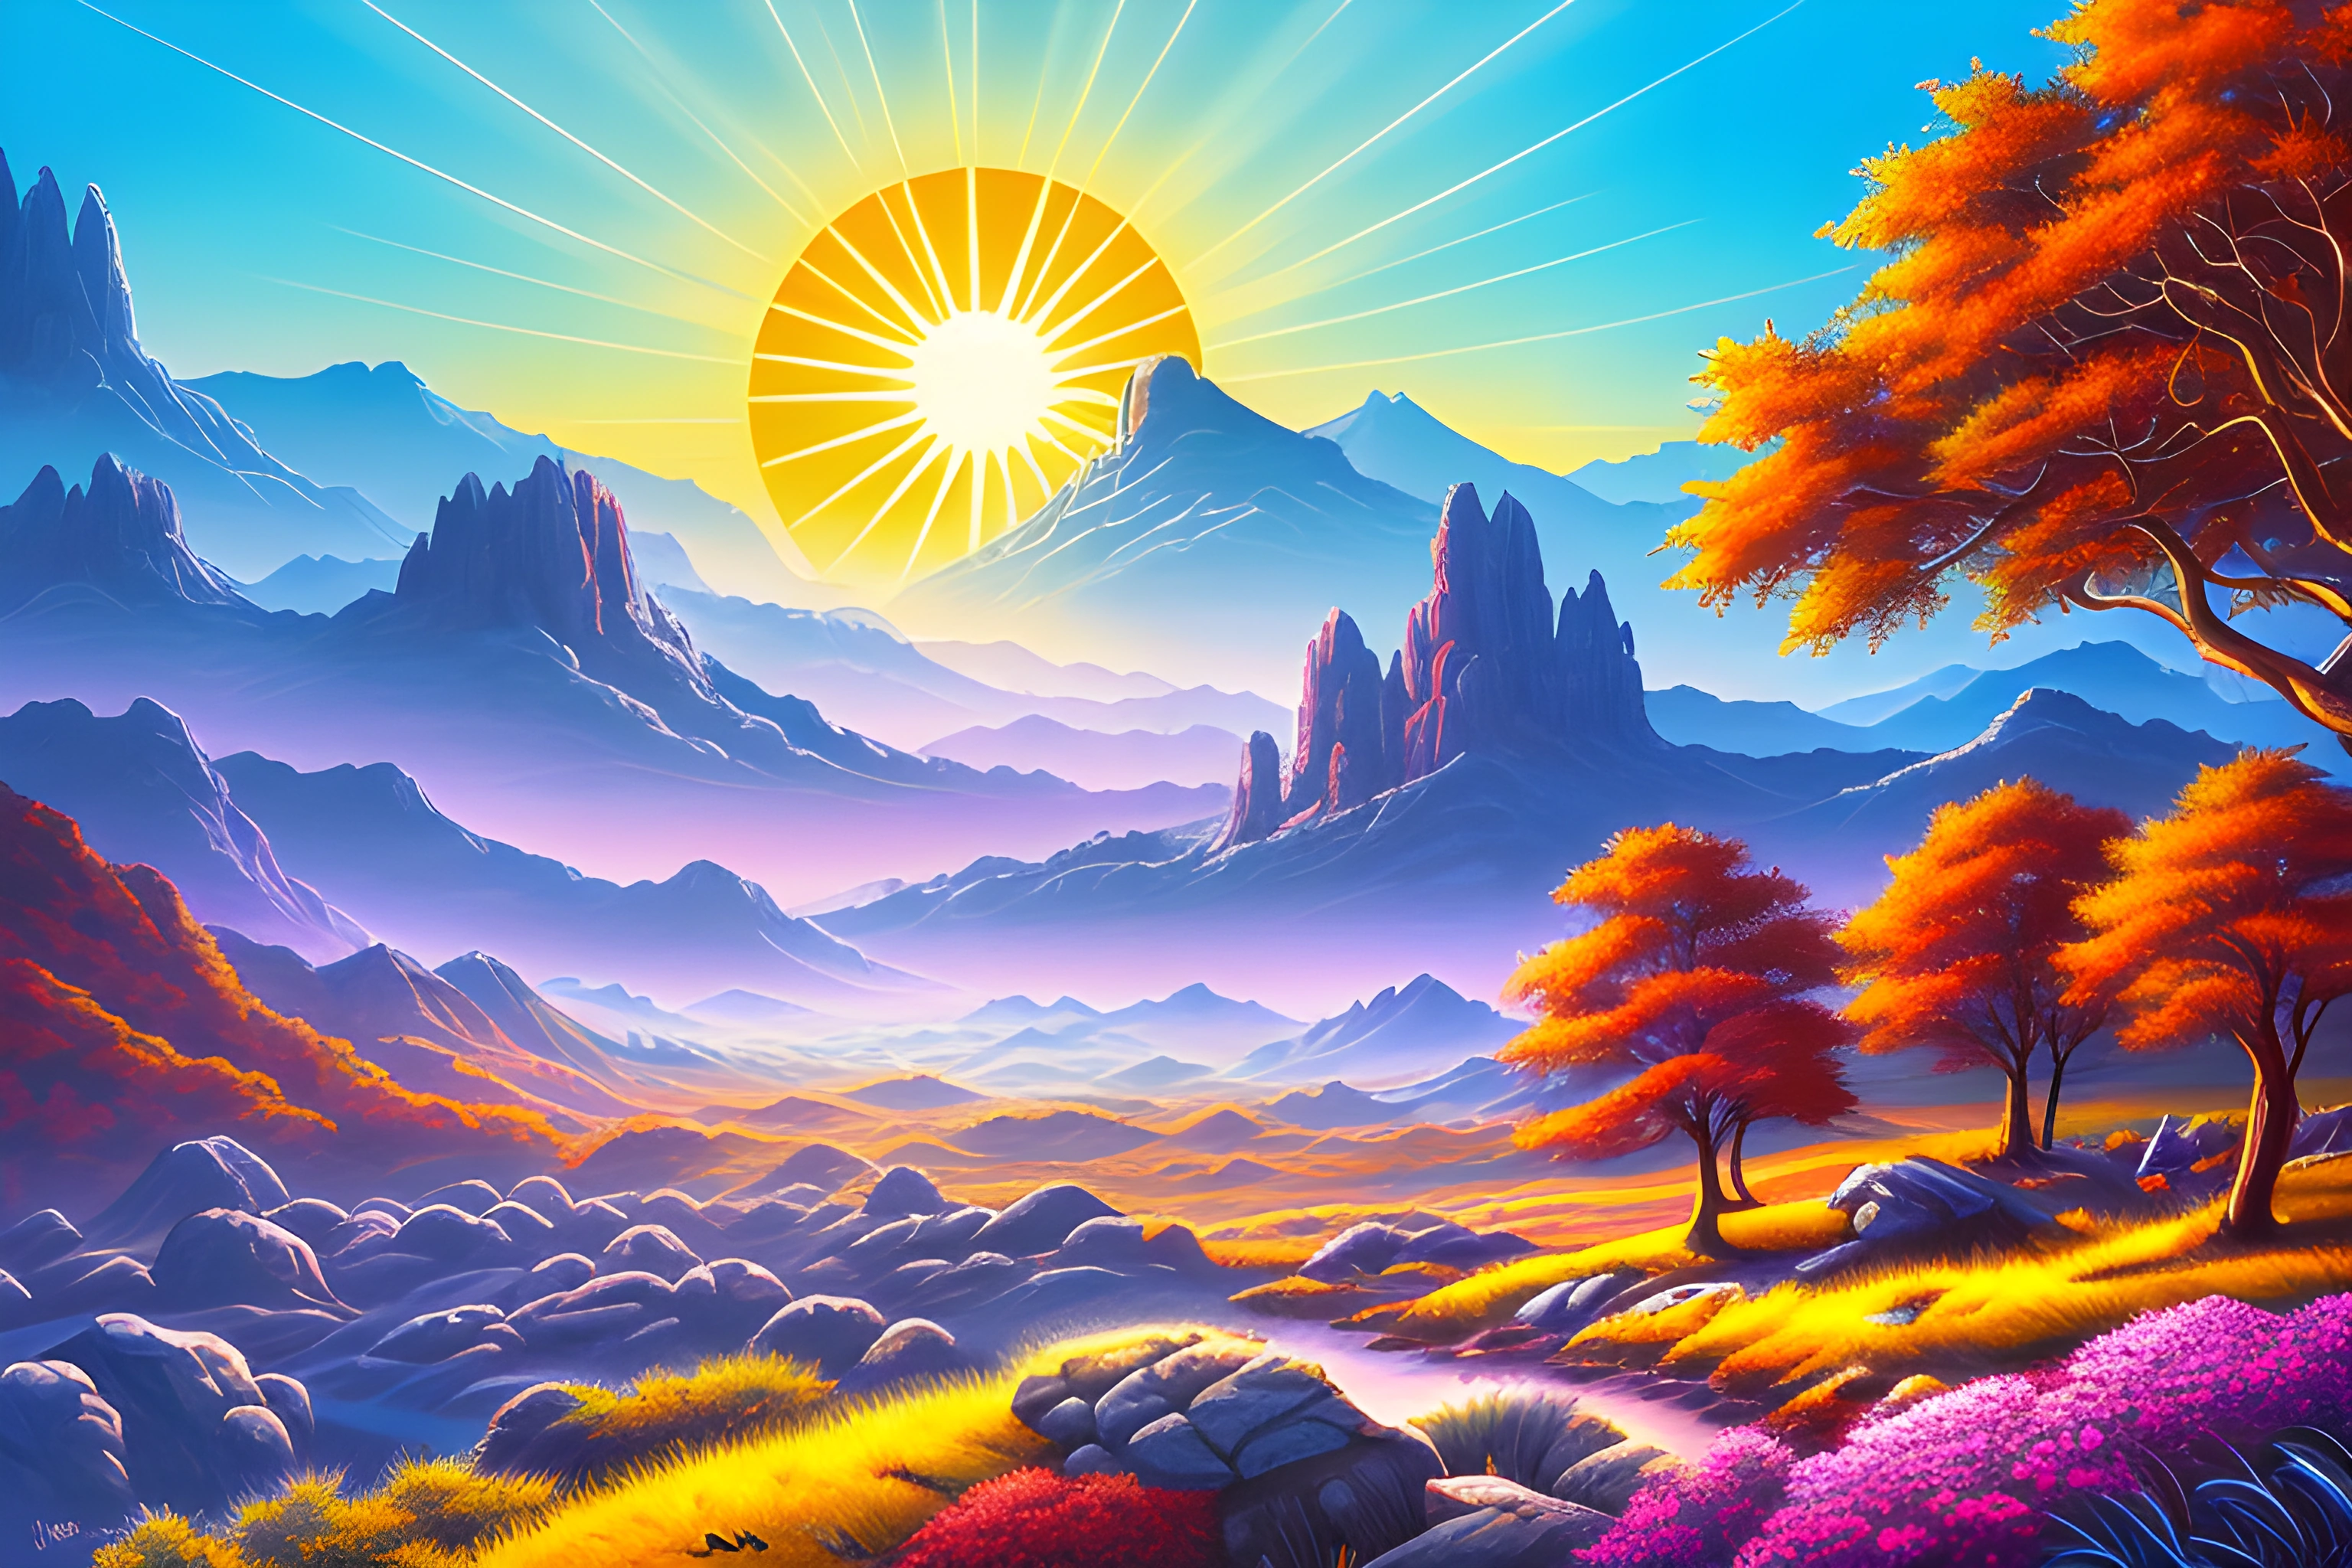 painting of a mountain landscape with a sun setting over the mountains